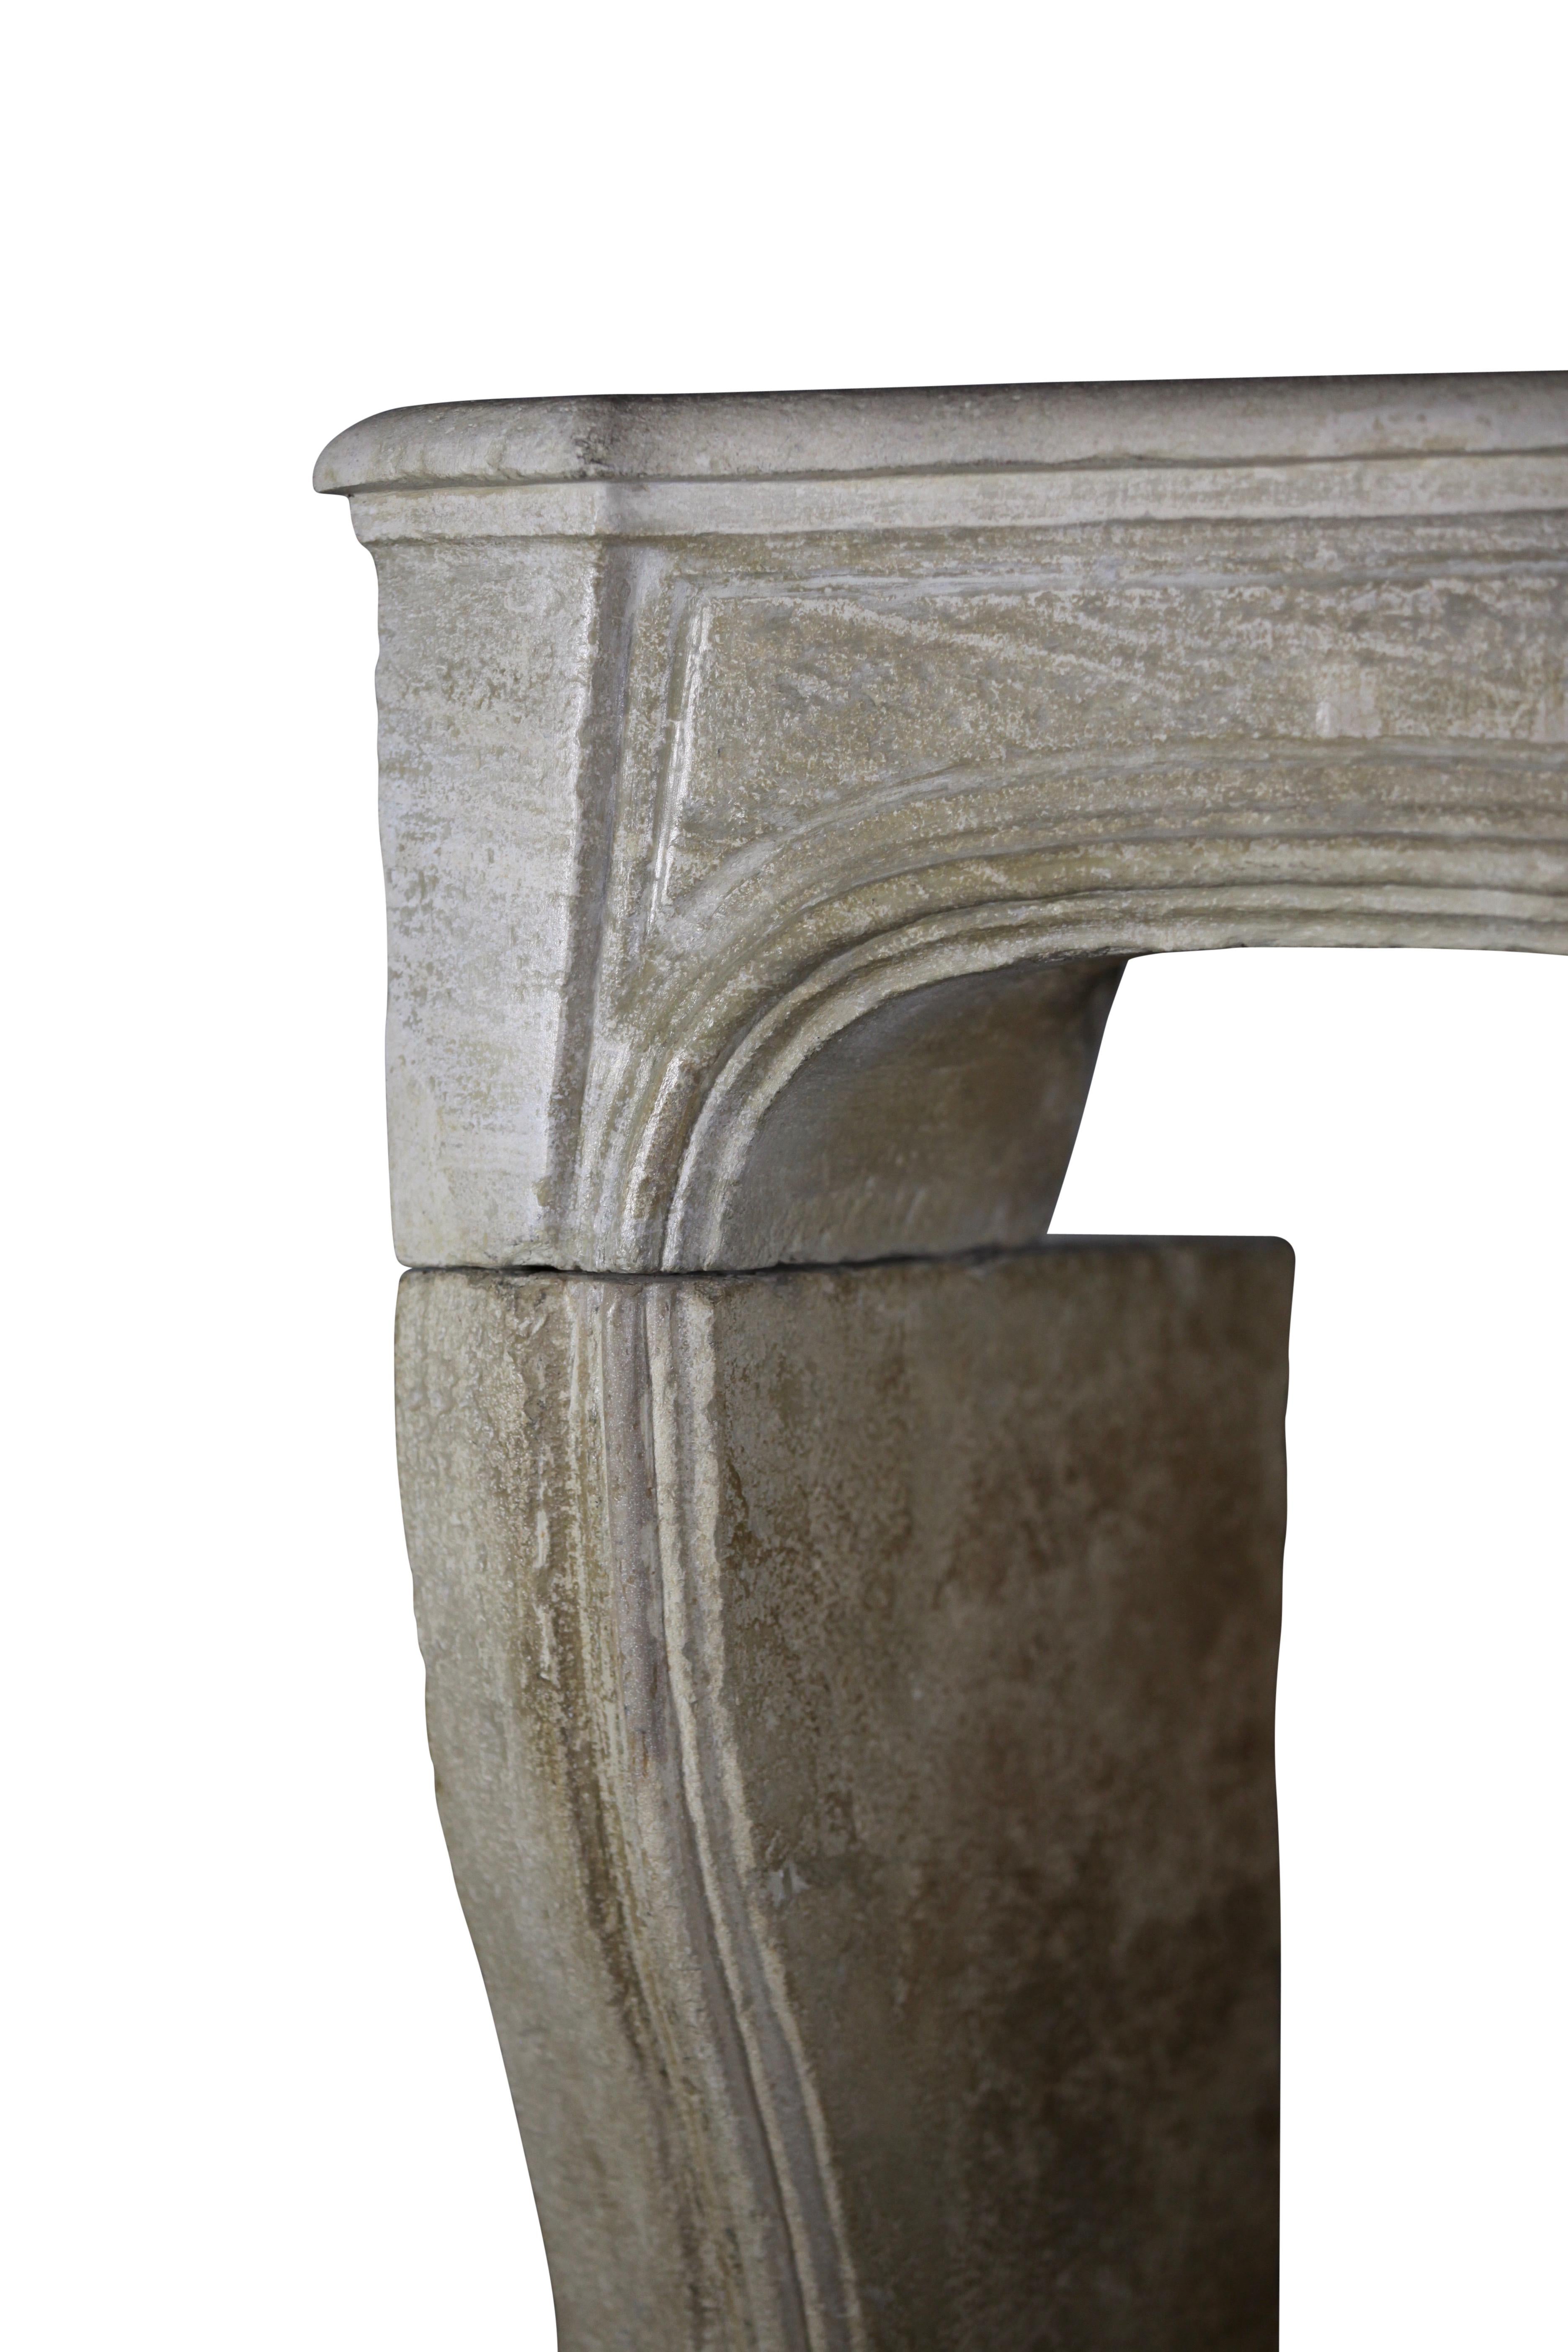 Louis XIV 18th Century French Country Antique Fireplace Surround in Limestone